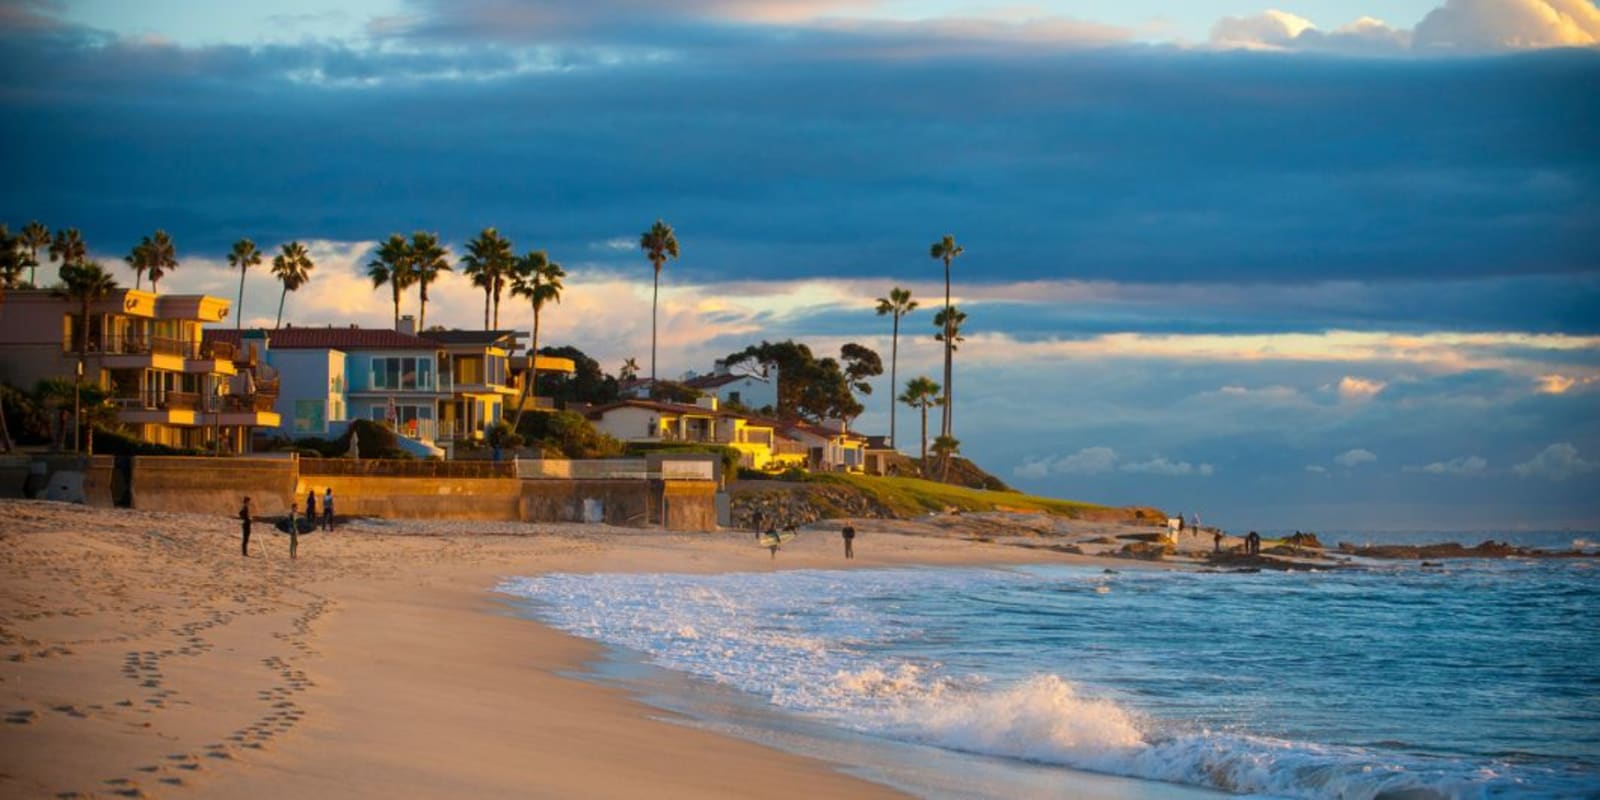 A beach in Sand Diego lined with palm trees and coastal houses